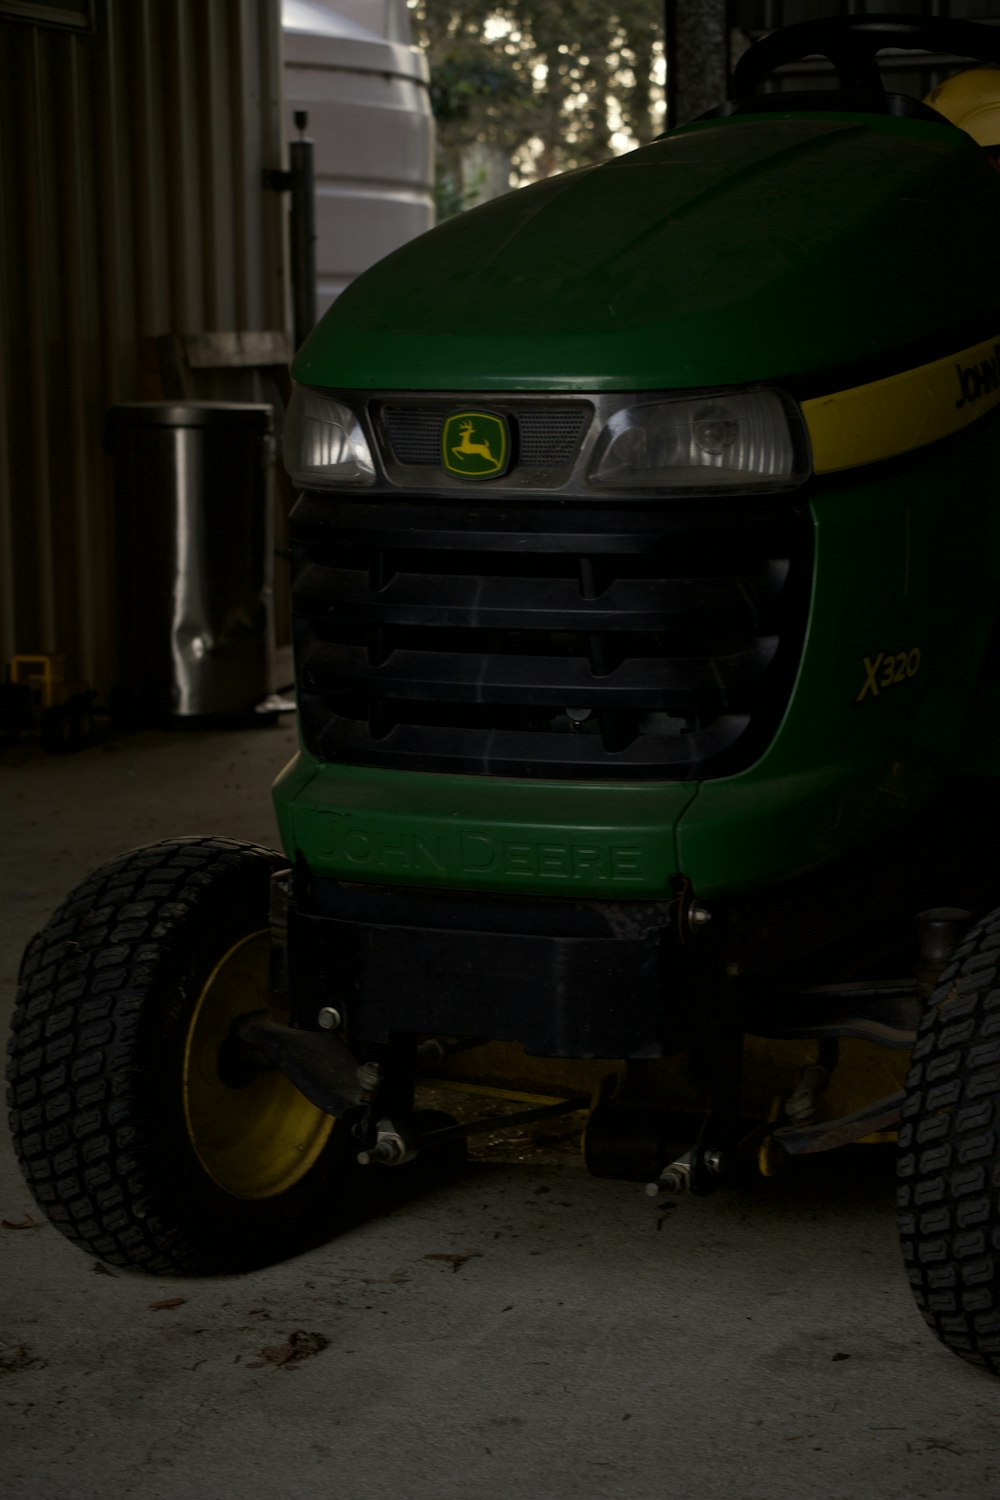 a green tractor parked inside of a garage